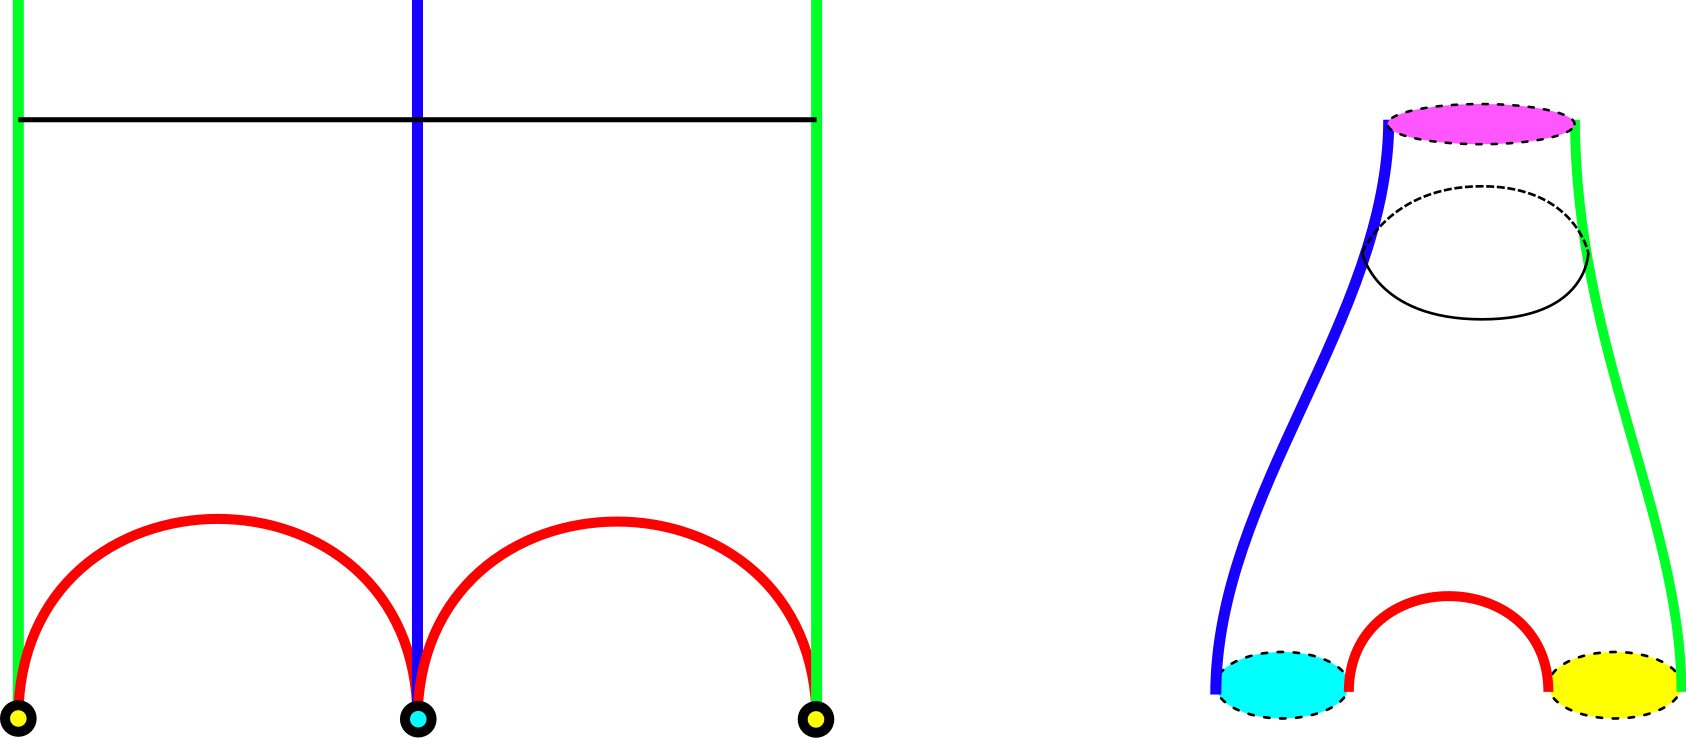 (Left) A gluing diagram for the thrice-punctured sphere. Edges that are colored the same are glued together. Notice that the points where the lines meet (including the point at infinity) lie on the boundary of hyperbolic space, and so are not part of the surface. (Right) The surface glued together.